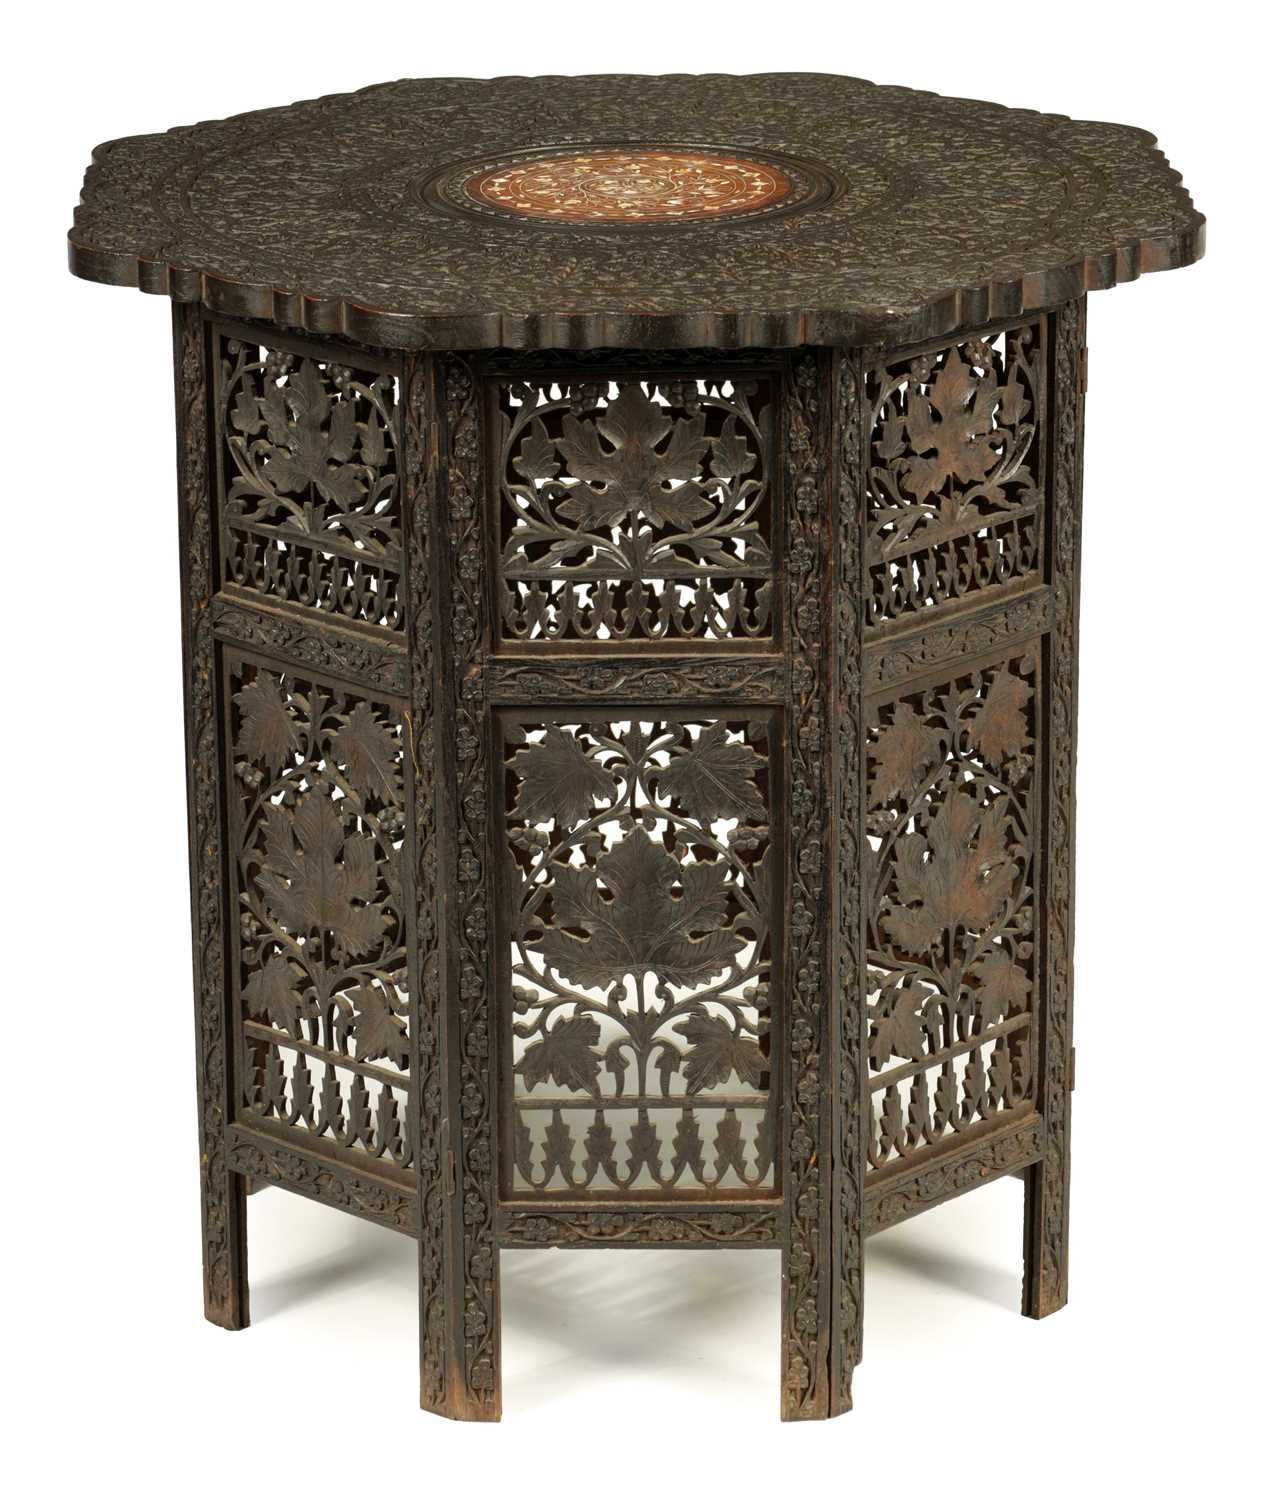 A 19TH CENTURY CARVED HARDWOOD ANGLO-INDIAN FOLDING OCCASIONAL TABLE PROBABLY BURMESE